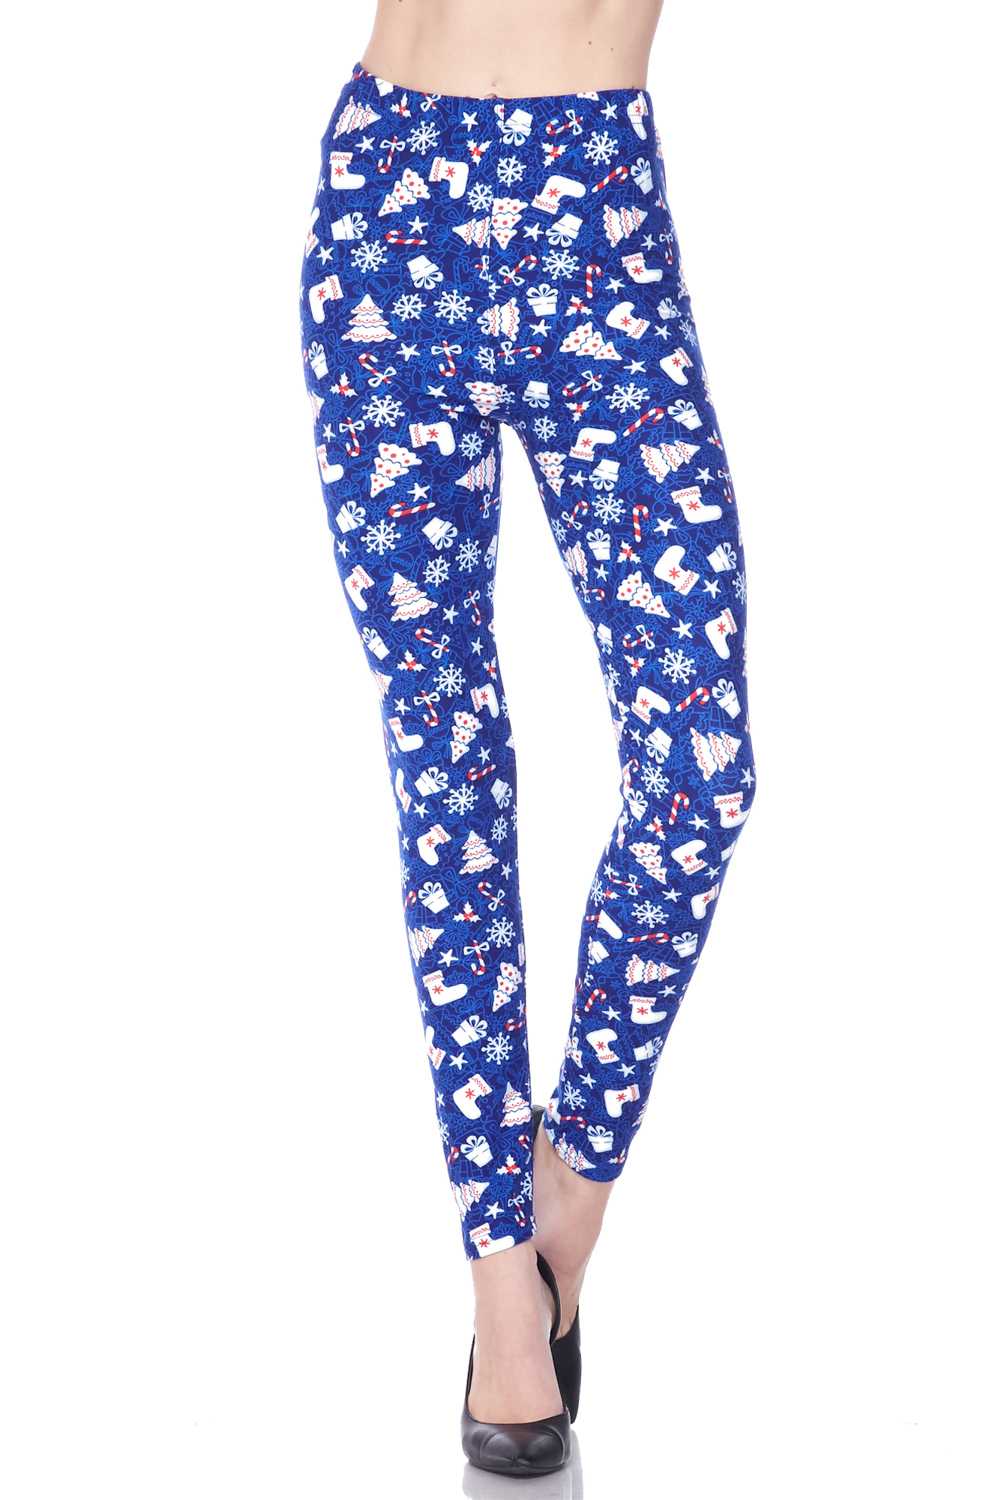 Snow Flakes And Gifts X-Mas Print Brushed Leggings - 2